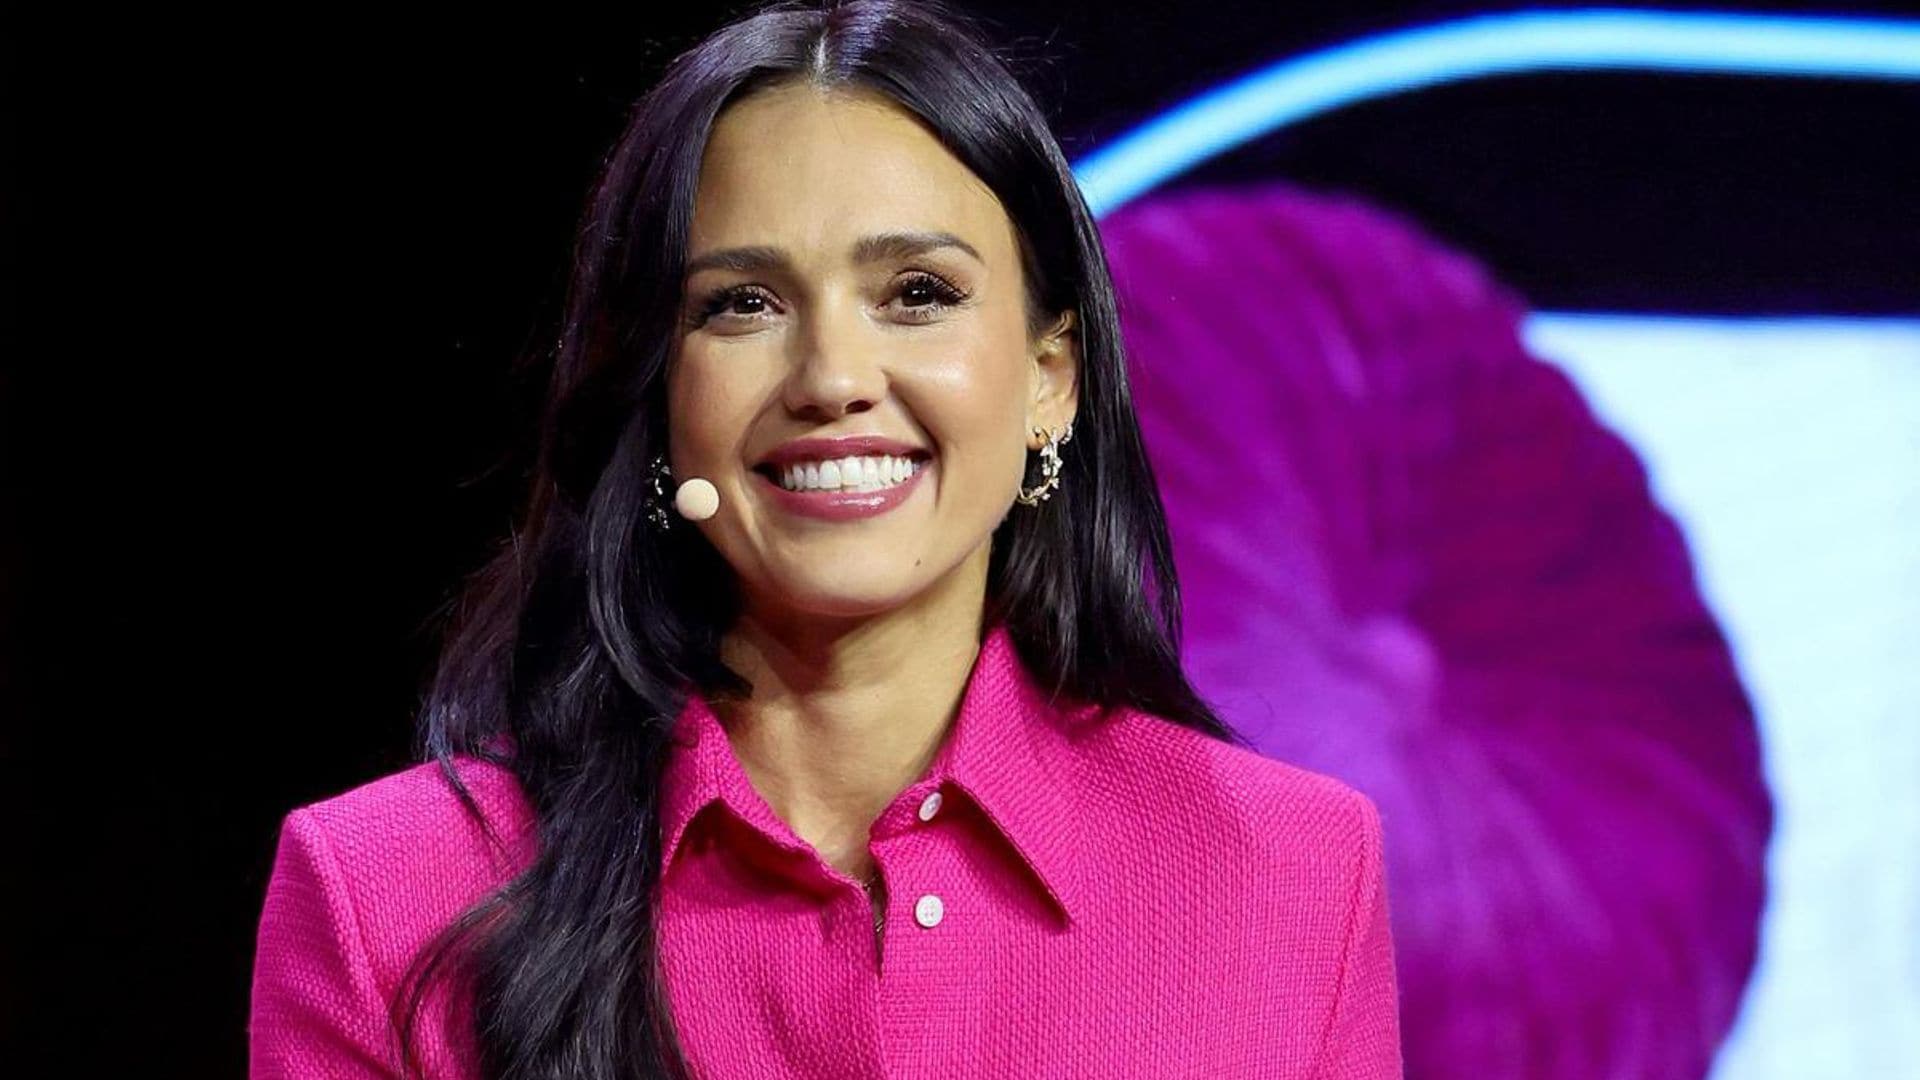 Jessica Alba steps down from her leadership role at The Honest Company